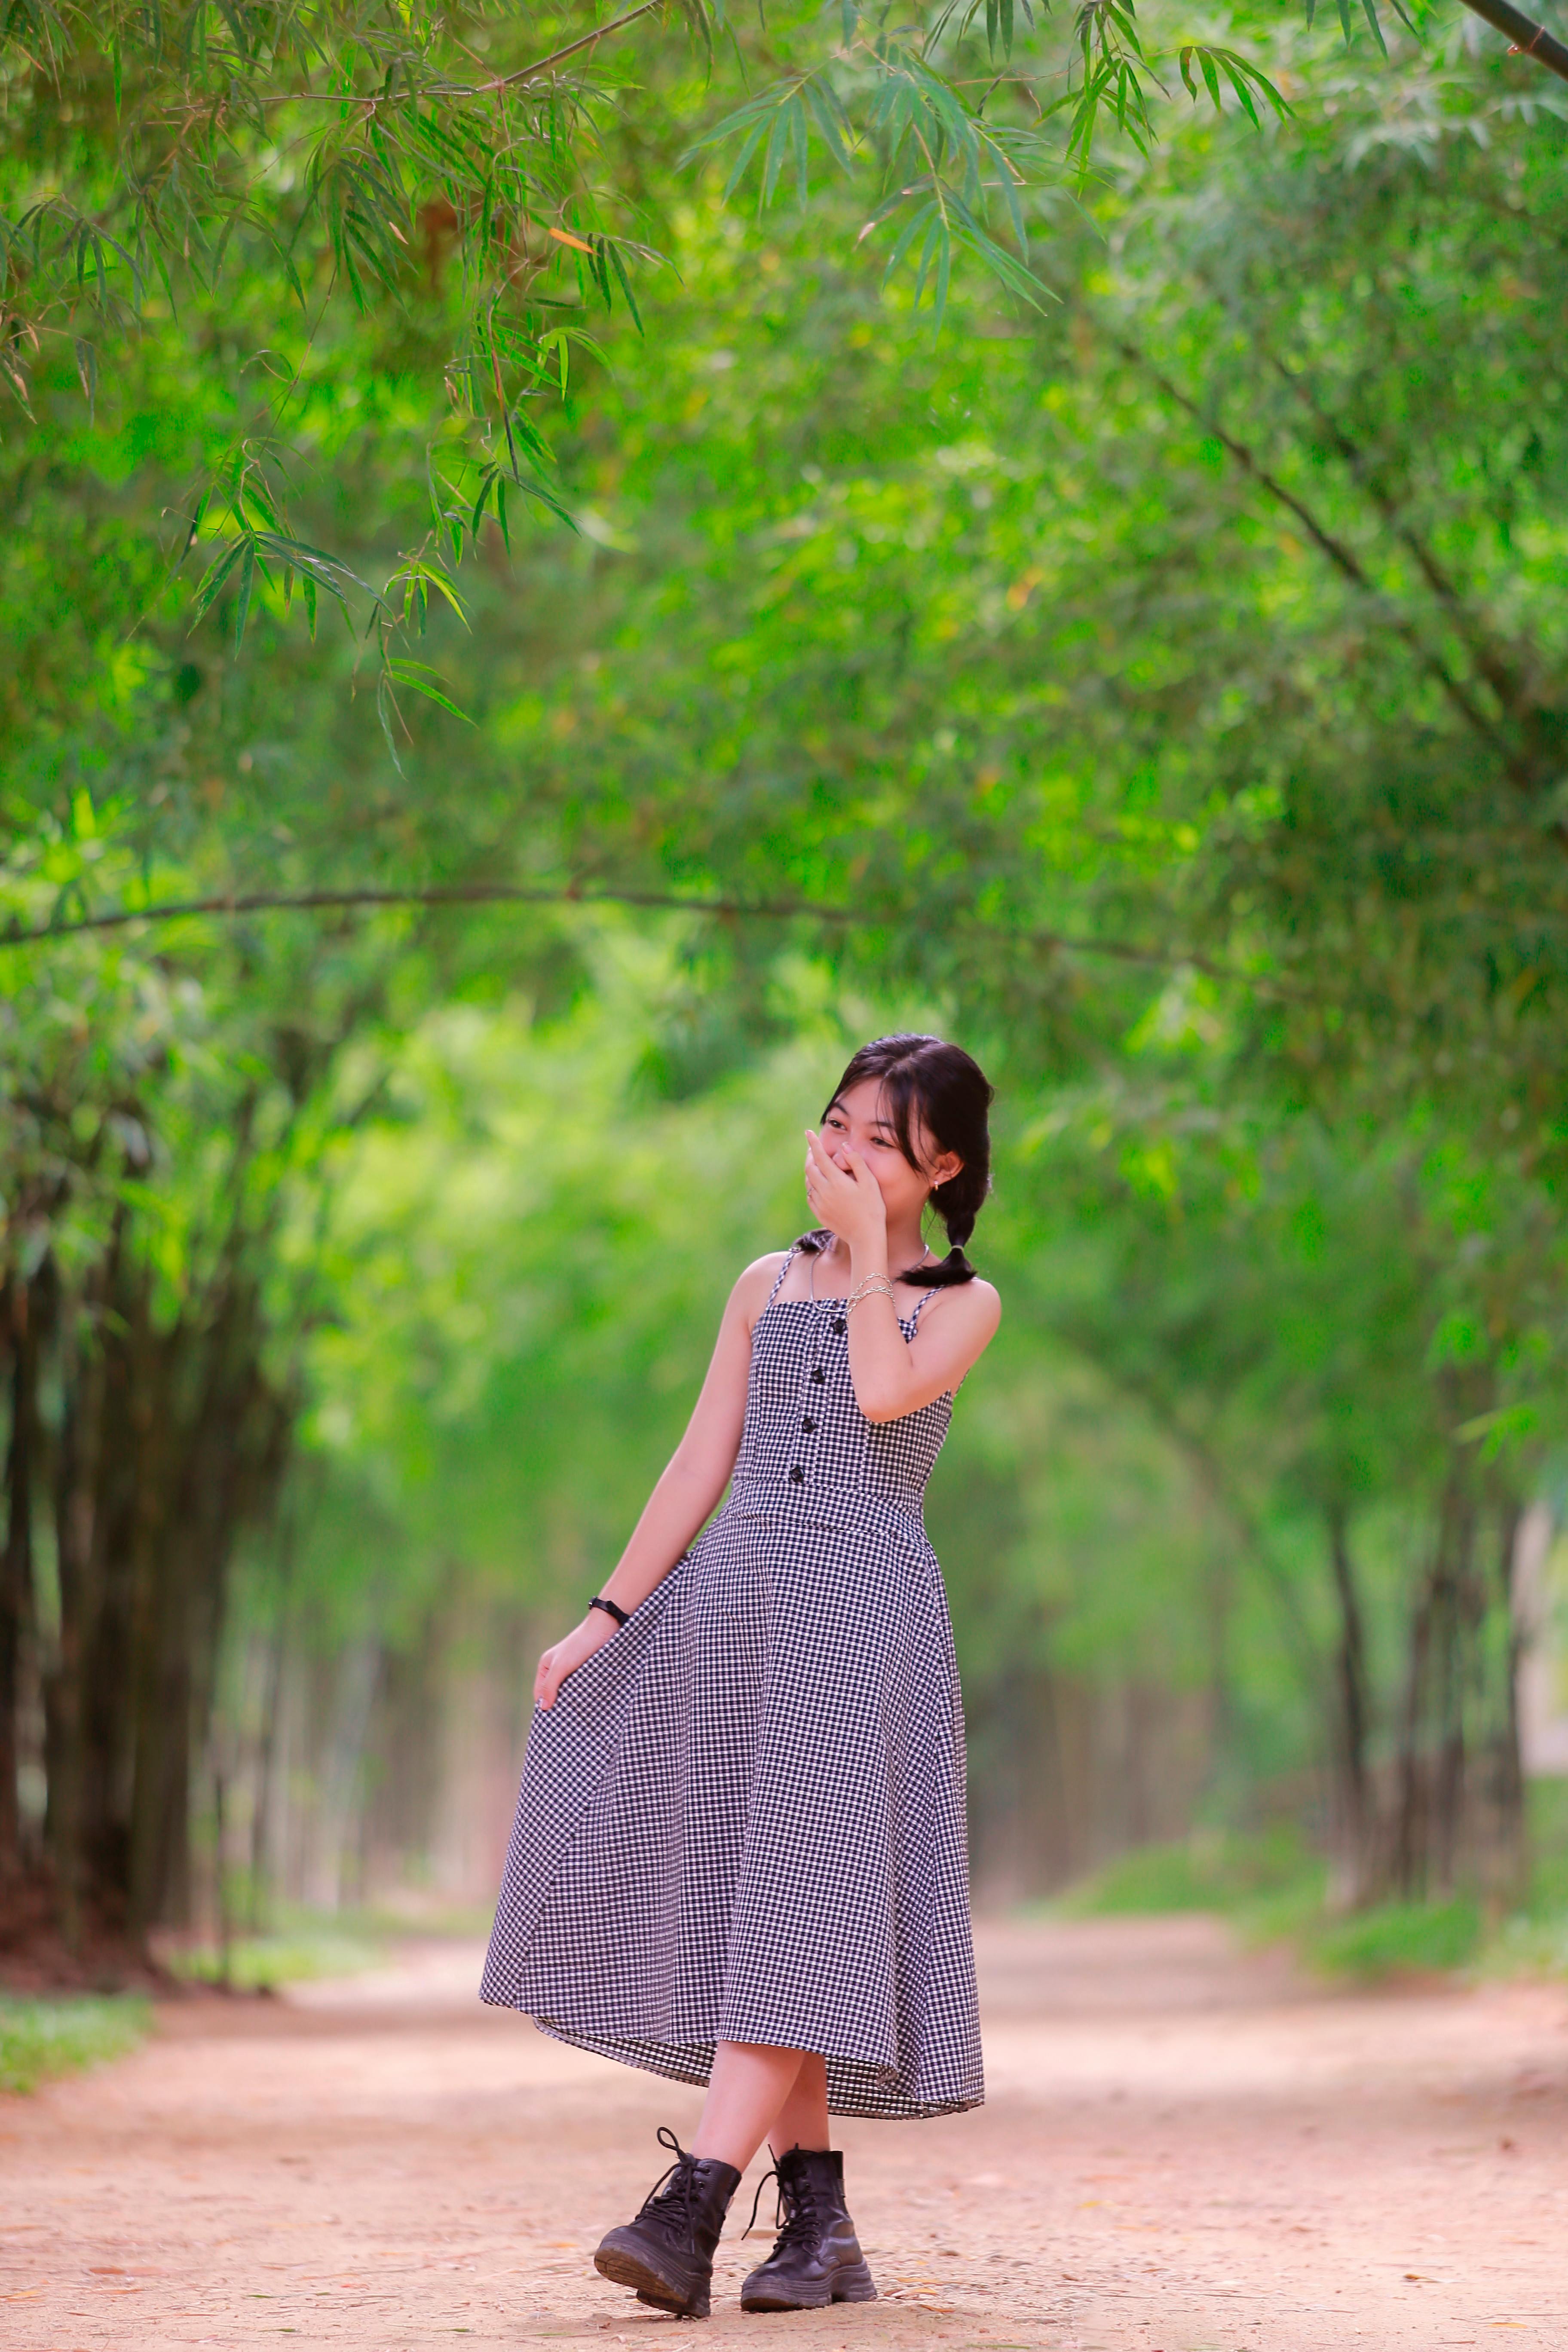 Girl in a Dress Posing in a Park · Free Stock Photo